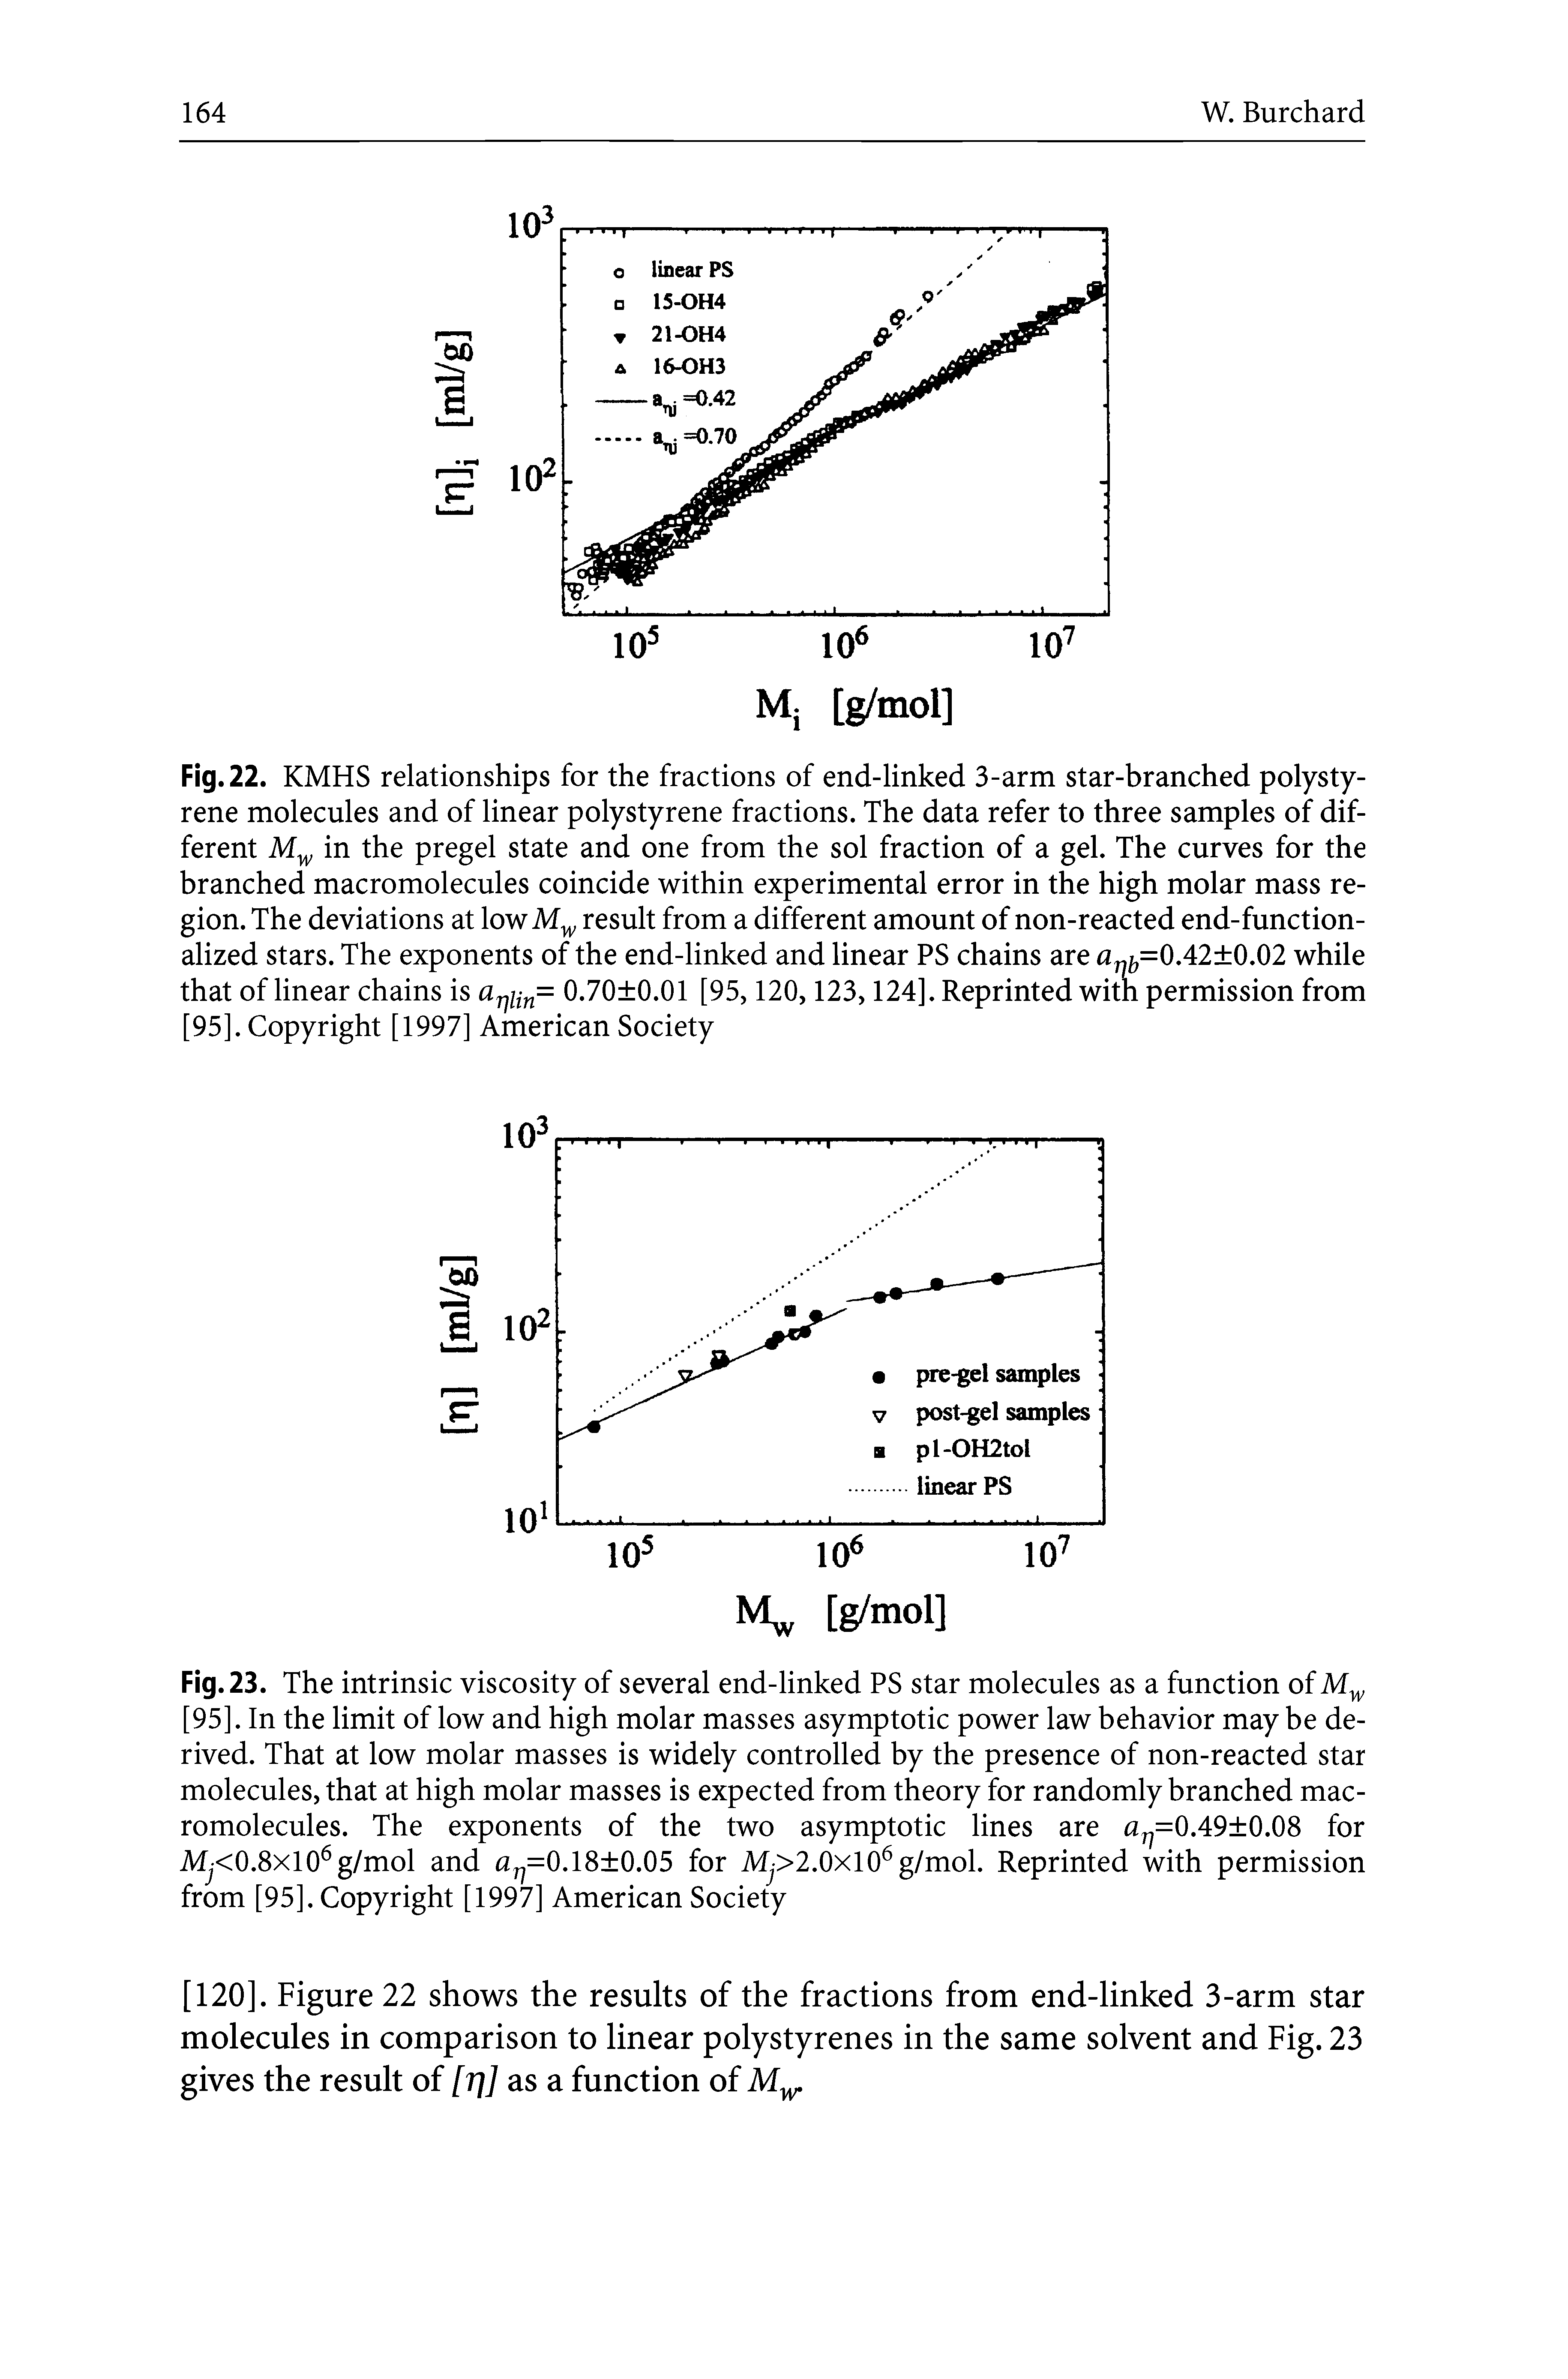 Fig. 23. The intrinsic viscosity of several end-linked PS star molecules as a function ofM [95]. In the limit of low and high molar masses asymptotic power law behavior may be derived. That at low molar masses is widely controlled by the presence of non-reacted star molecules, that at high molar masses is expected from theory for randomly branched macromolecules. The exponents of the two asymptotic lines are a =0.49 0.08 for M <0.8x10 g/mol and a =0.18 0.05 for M >2.0xl0 g/mol. Reprinted with permission from [95]. Copyright [1997] American Society...